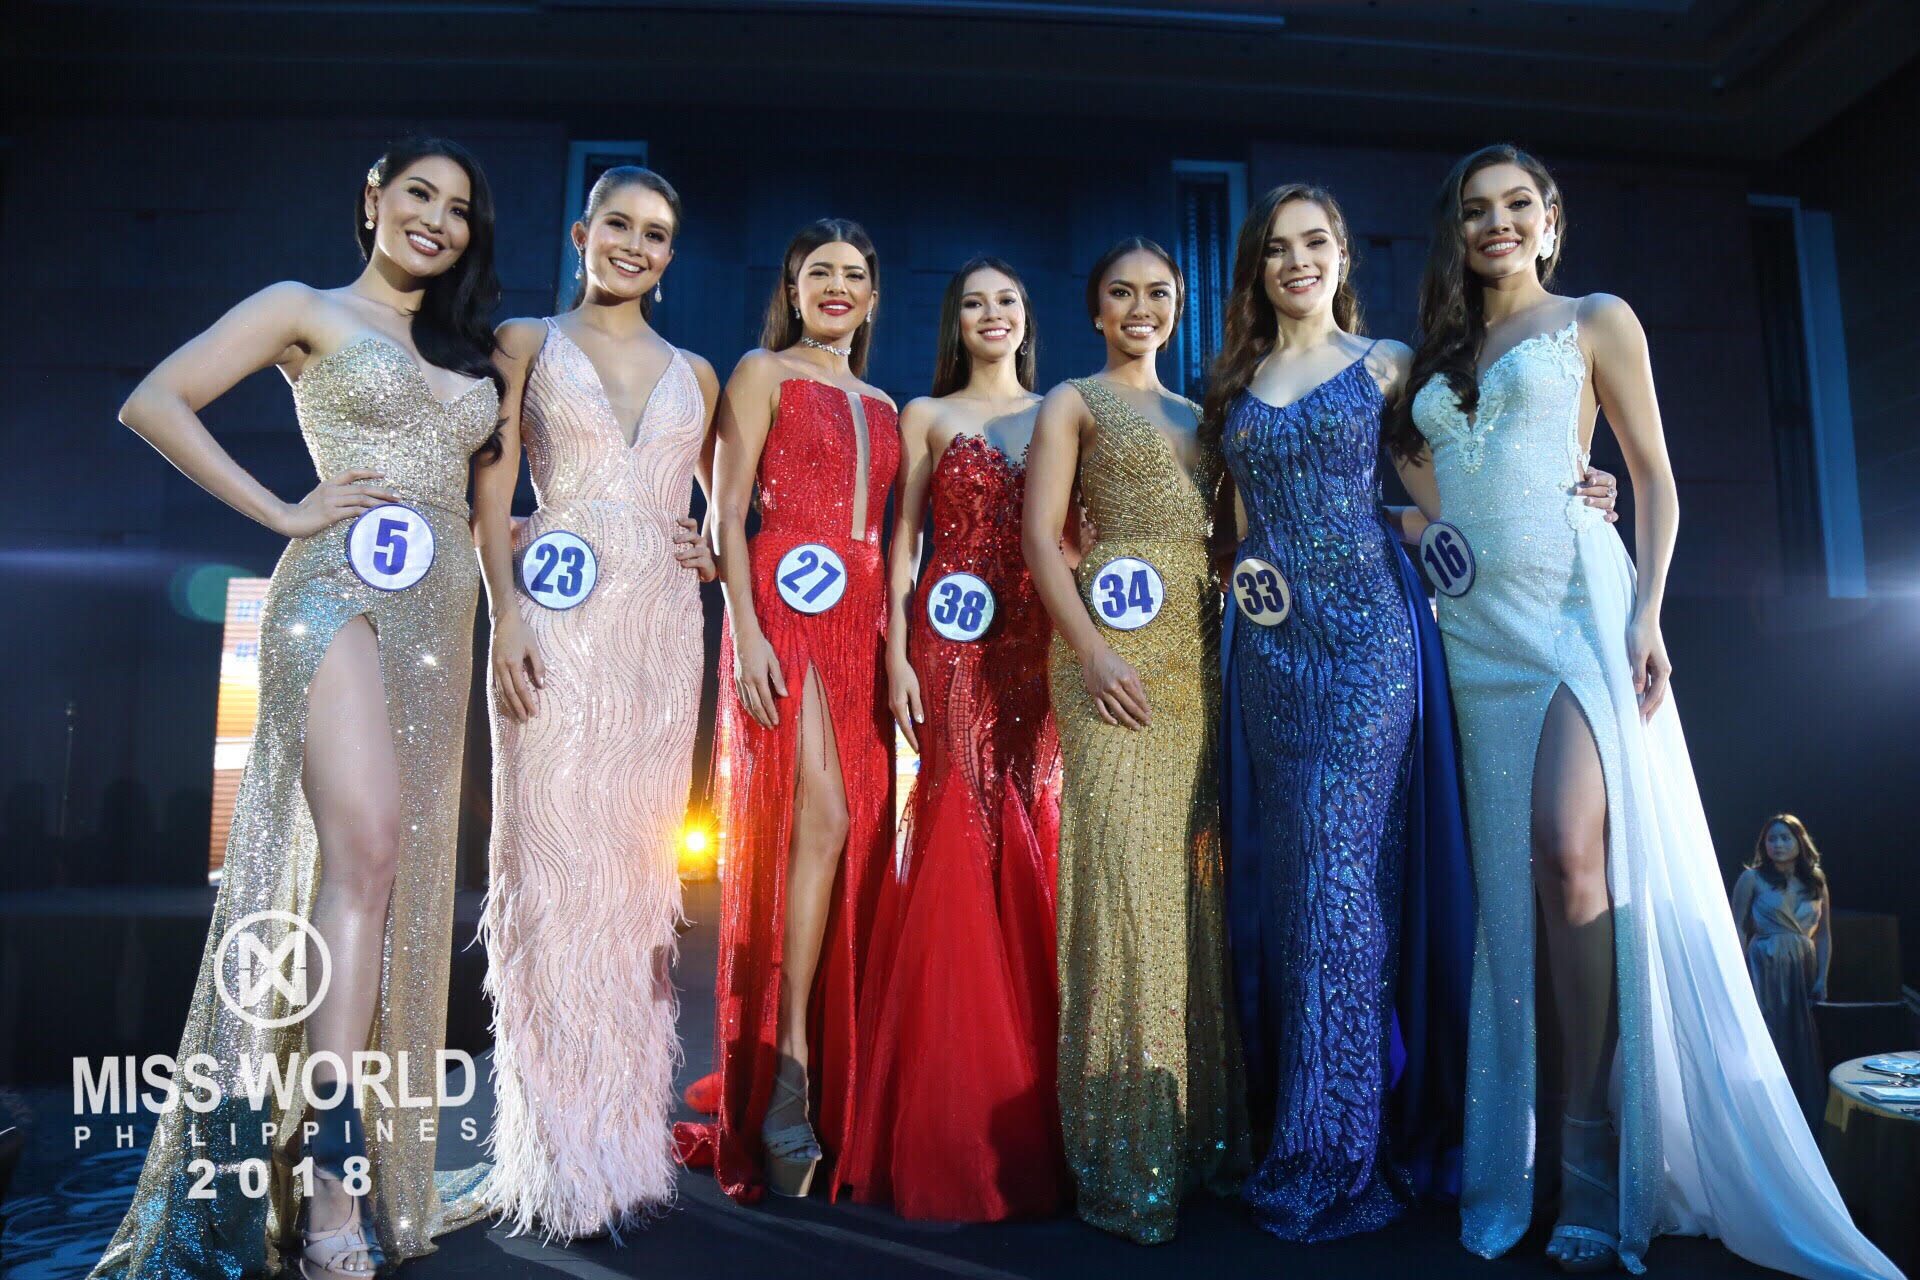 Miss World Philippines 2018 Charity Gala review